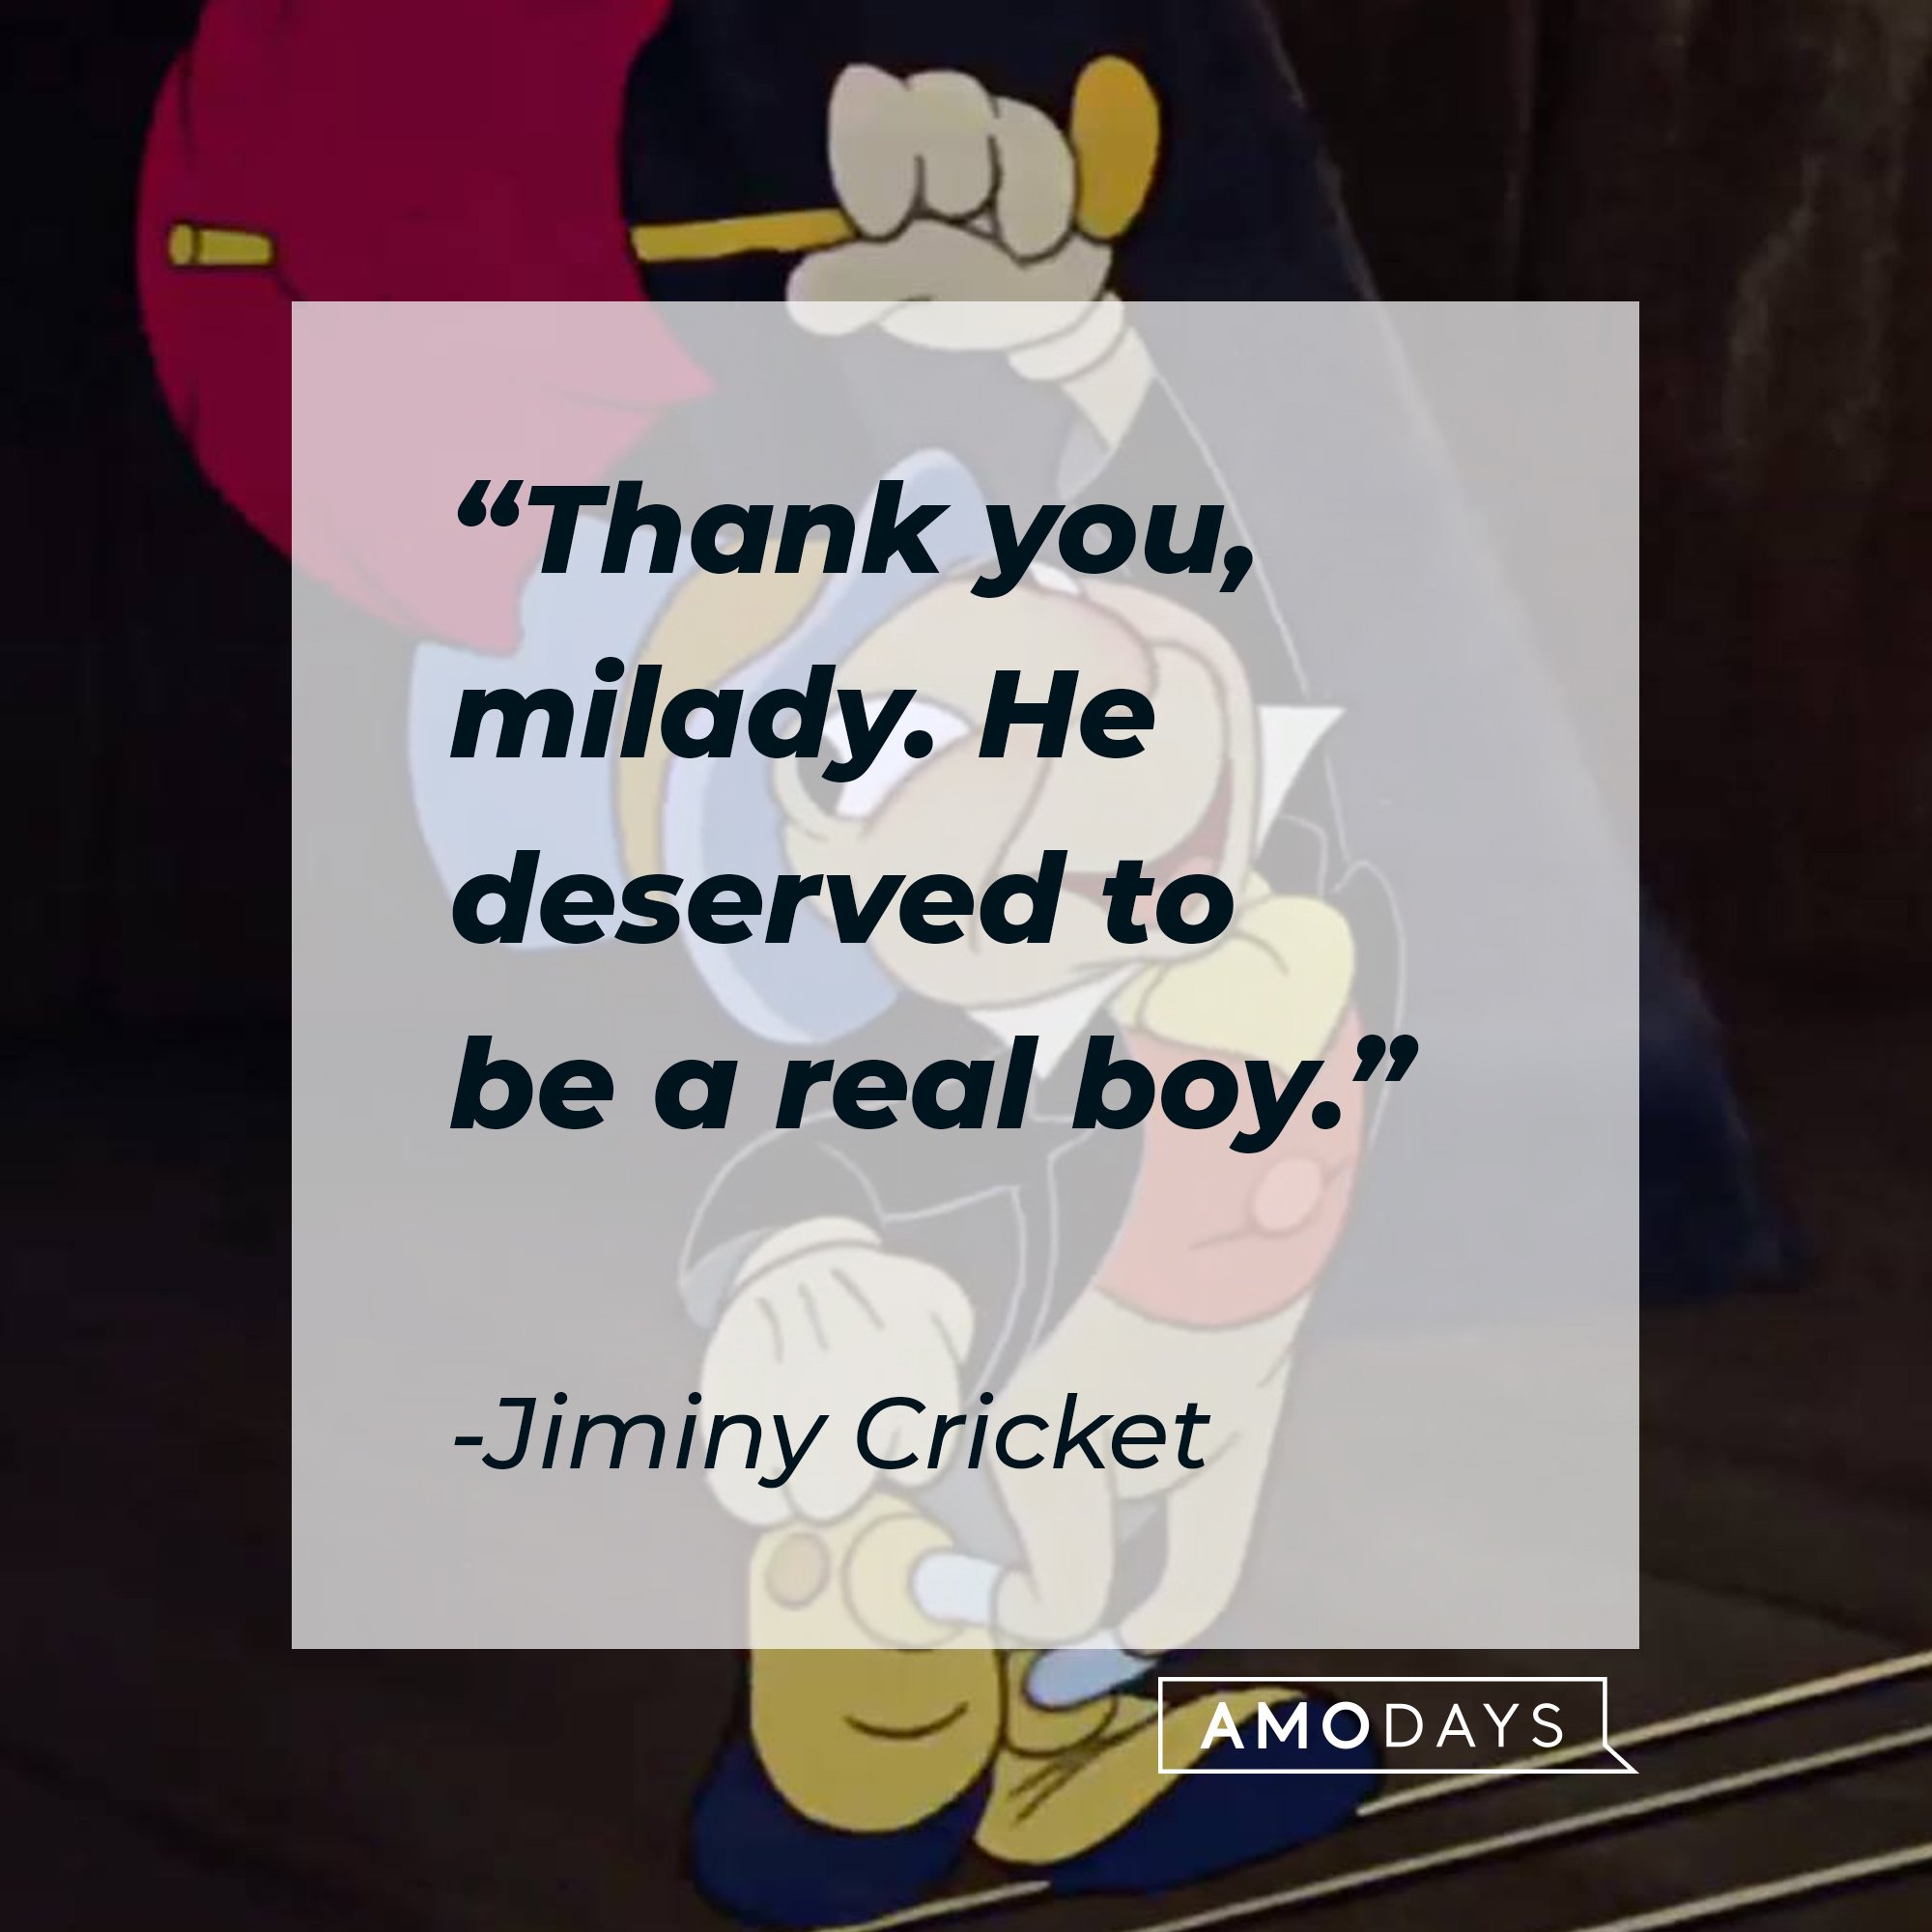  Jiminy Cricket's quote: "Thank you, milady. He deserved to be a real boy." | Image: AmoDays